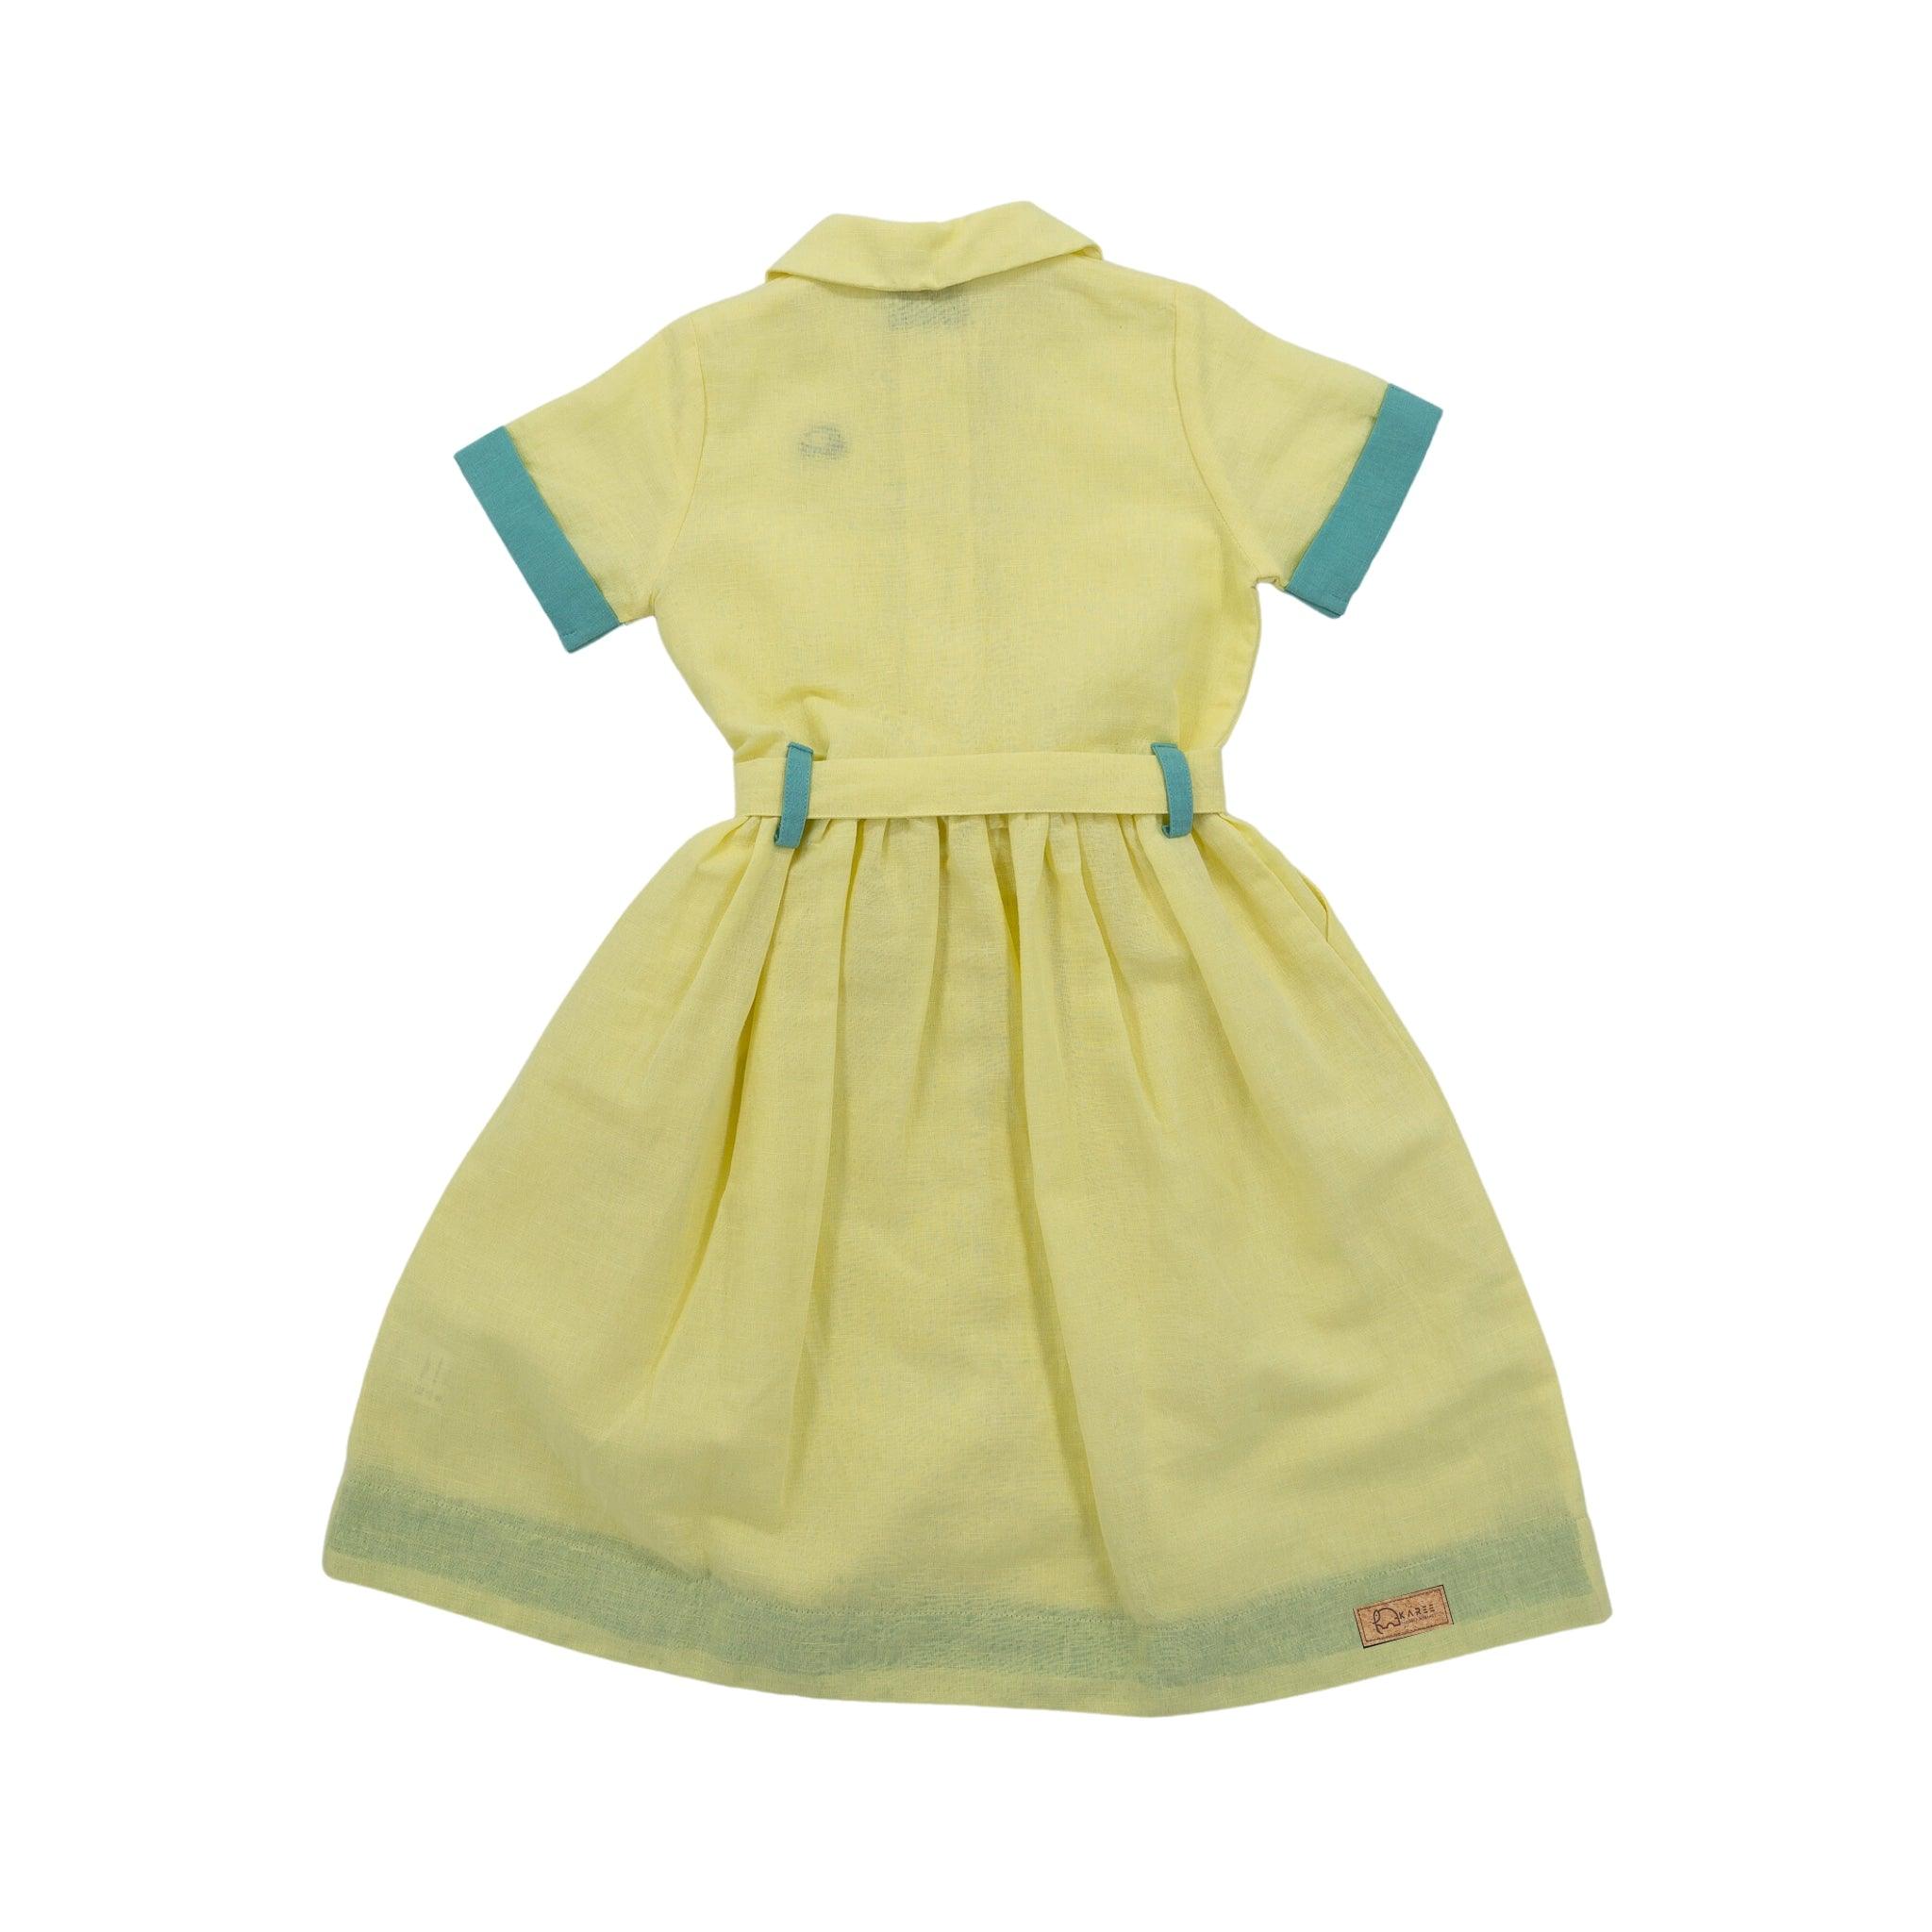 A Karee Elfin Yellow Linen Below Knee Length Dress for Girls with short turquoise-trimmed sleeves and collar, and a pleated skirt, displayed on a white background.